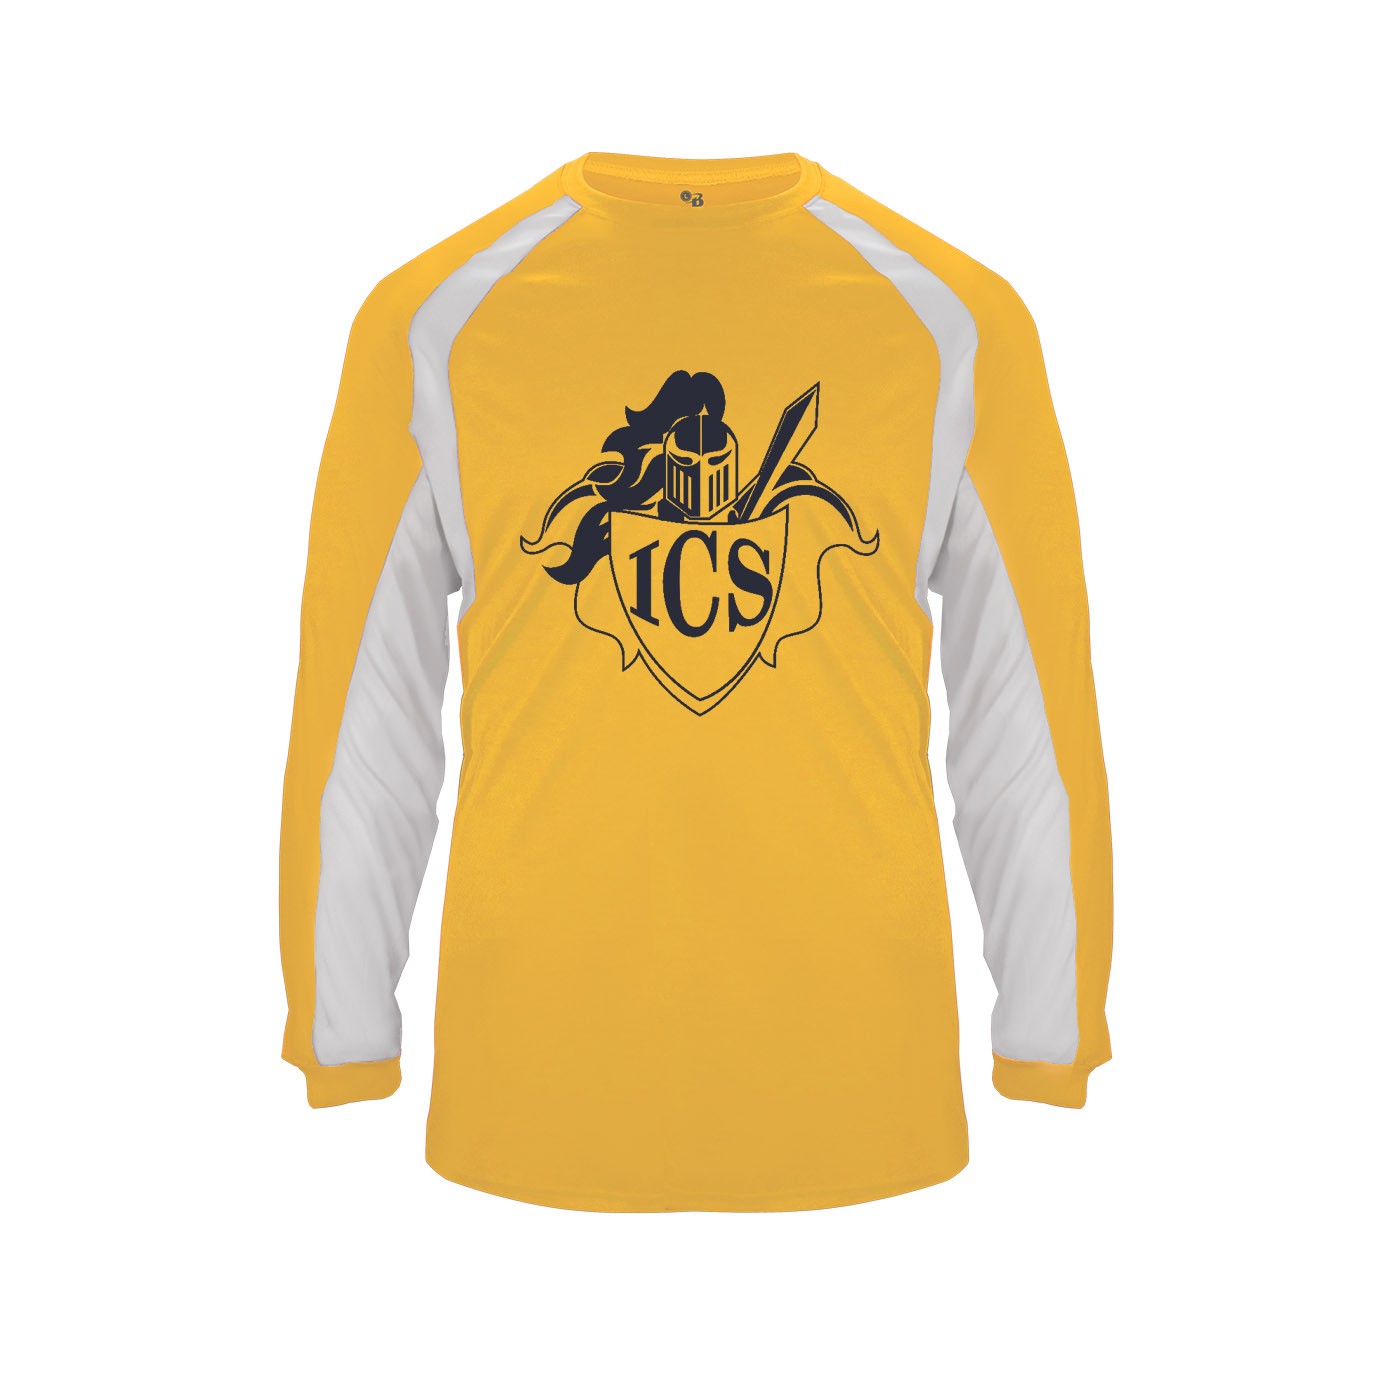 ICS Staff Hook L/S T-Shirt w/ Navy Logo - Please Allow 2-3 Weeks for Delivery